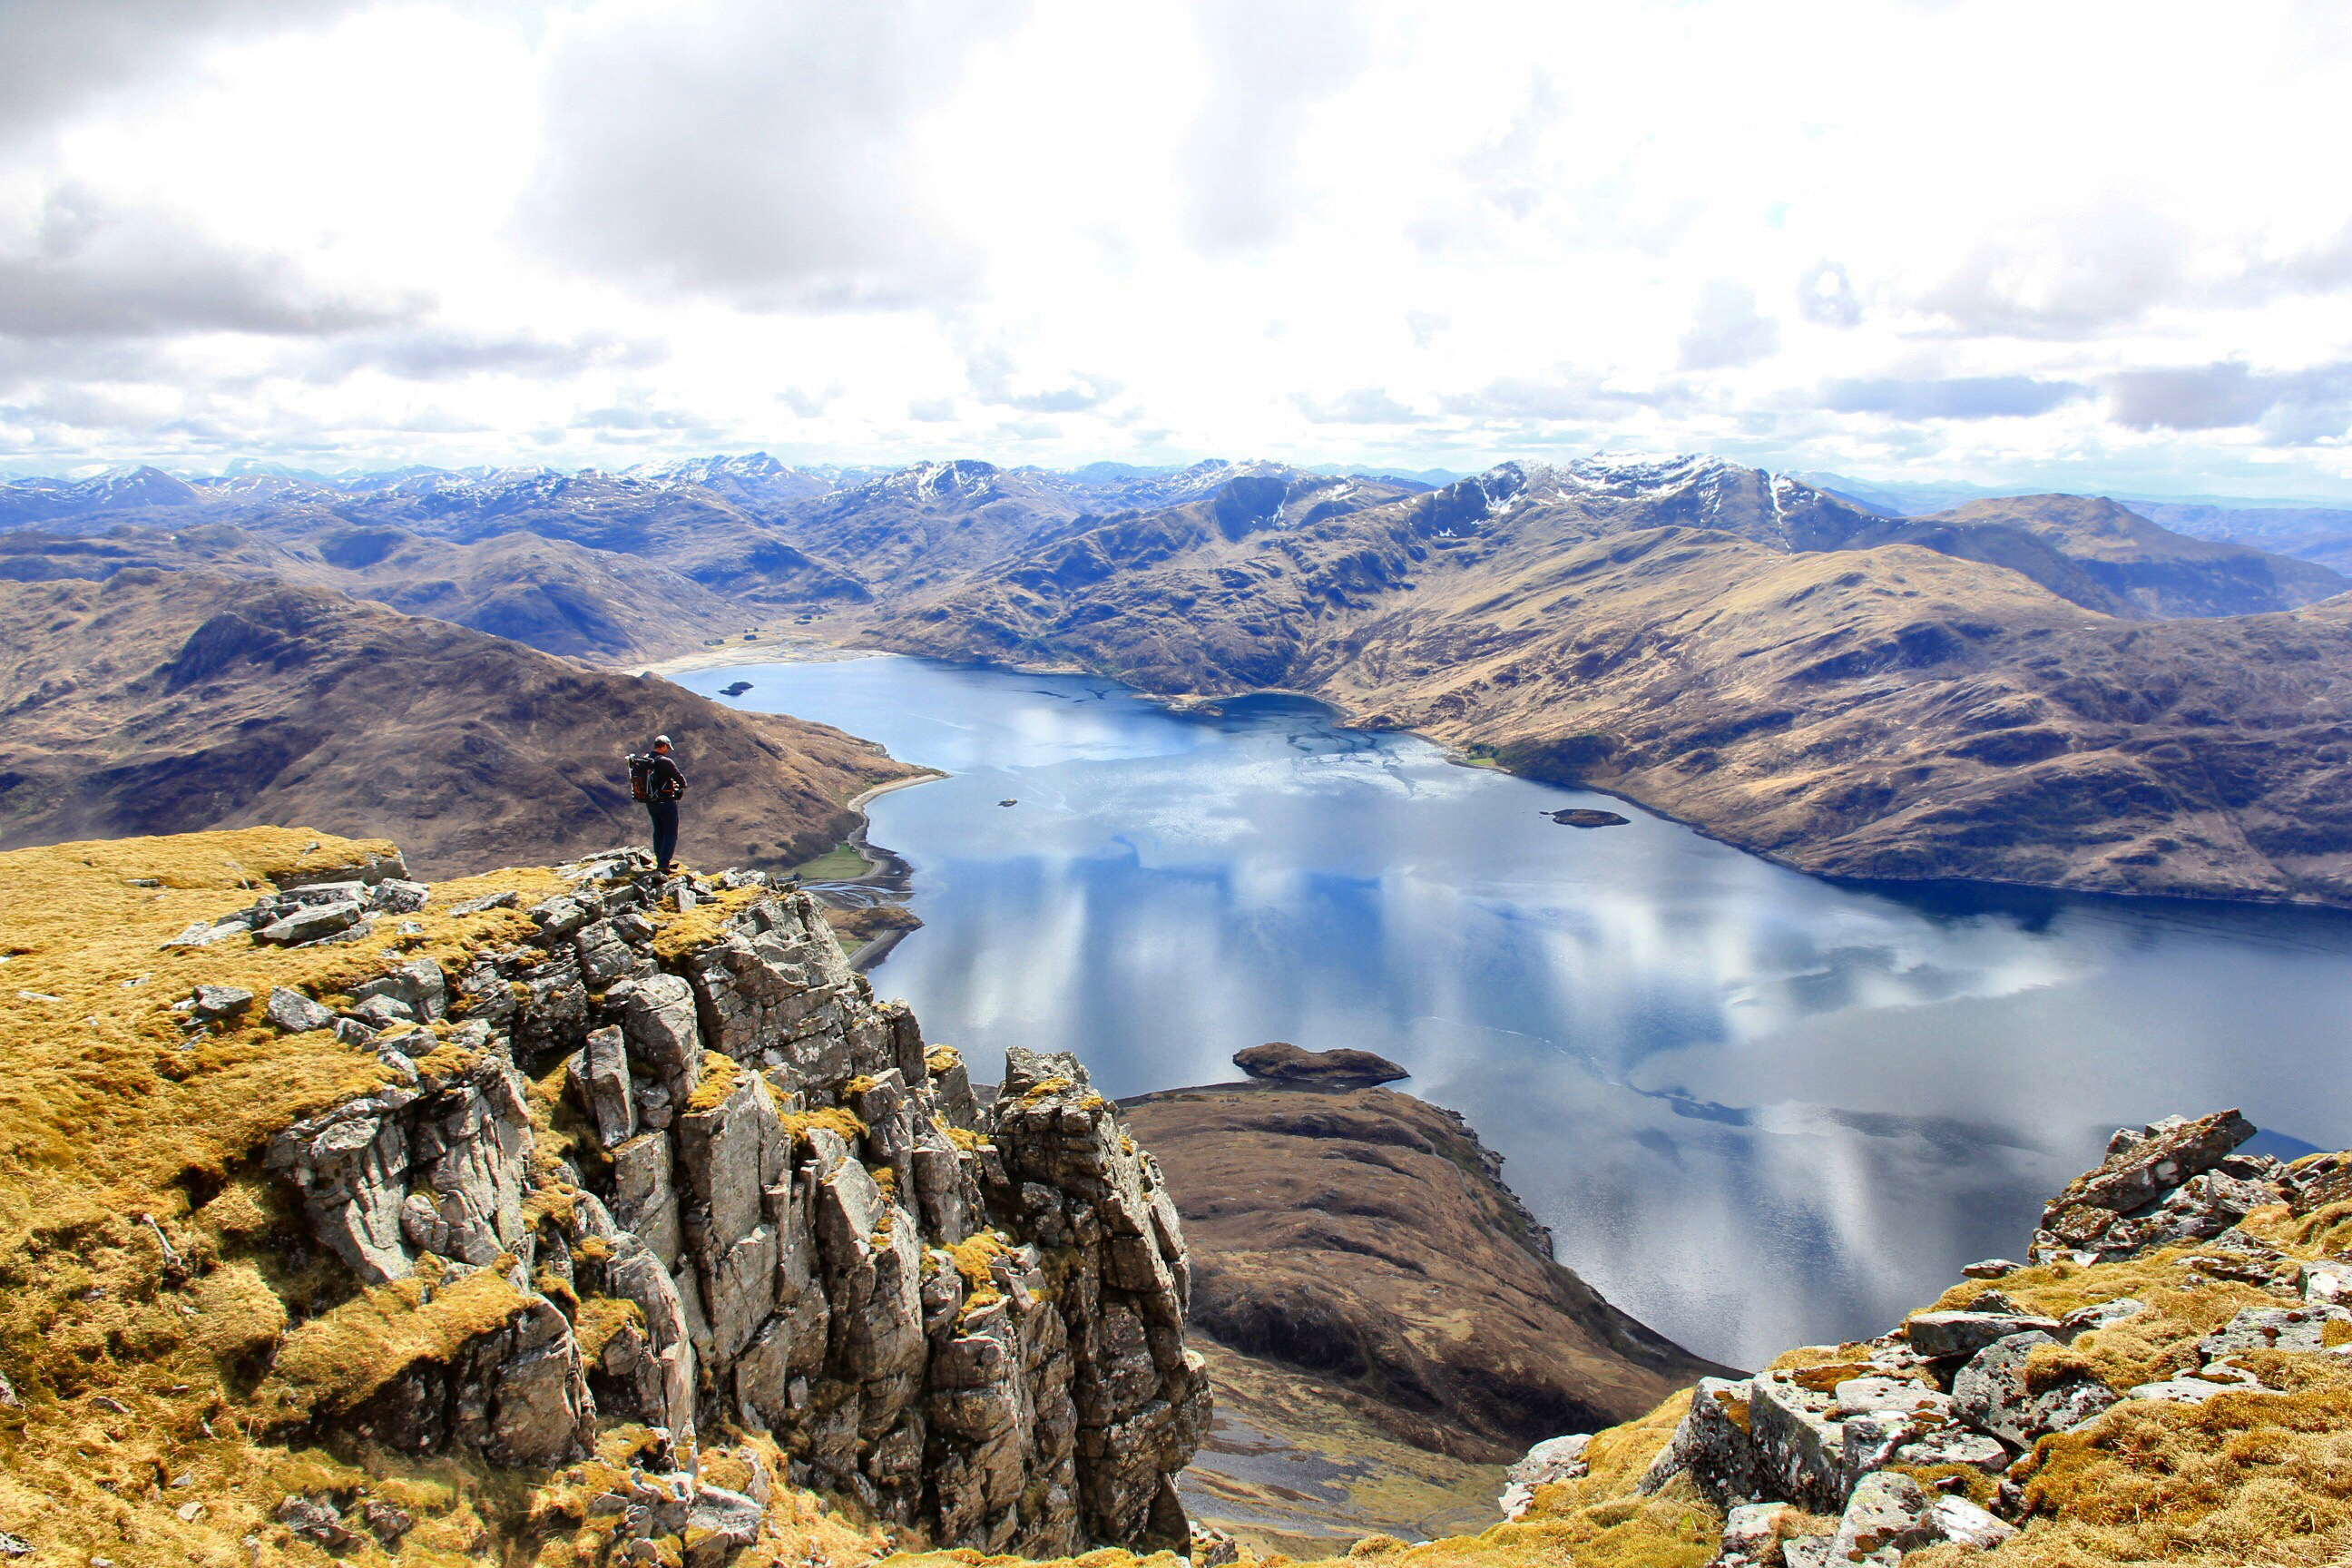 Loch Hourn and the mountains of Knoydart from Beinn Sgritheall.
Picture by Bill Cameron